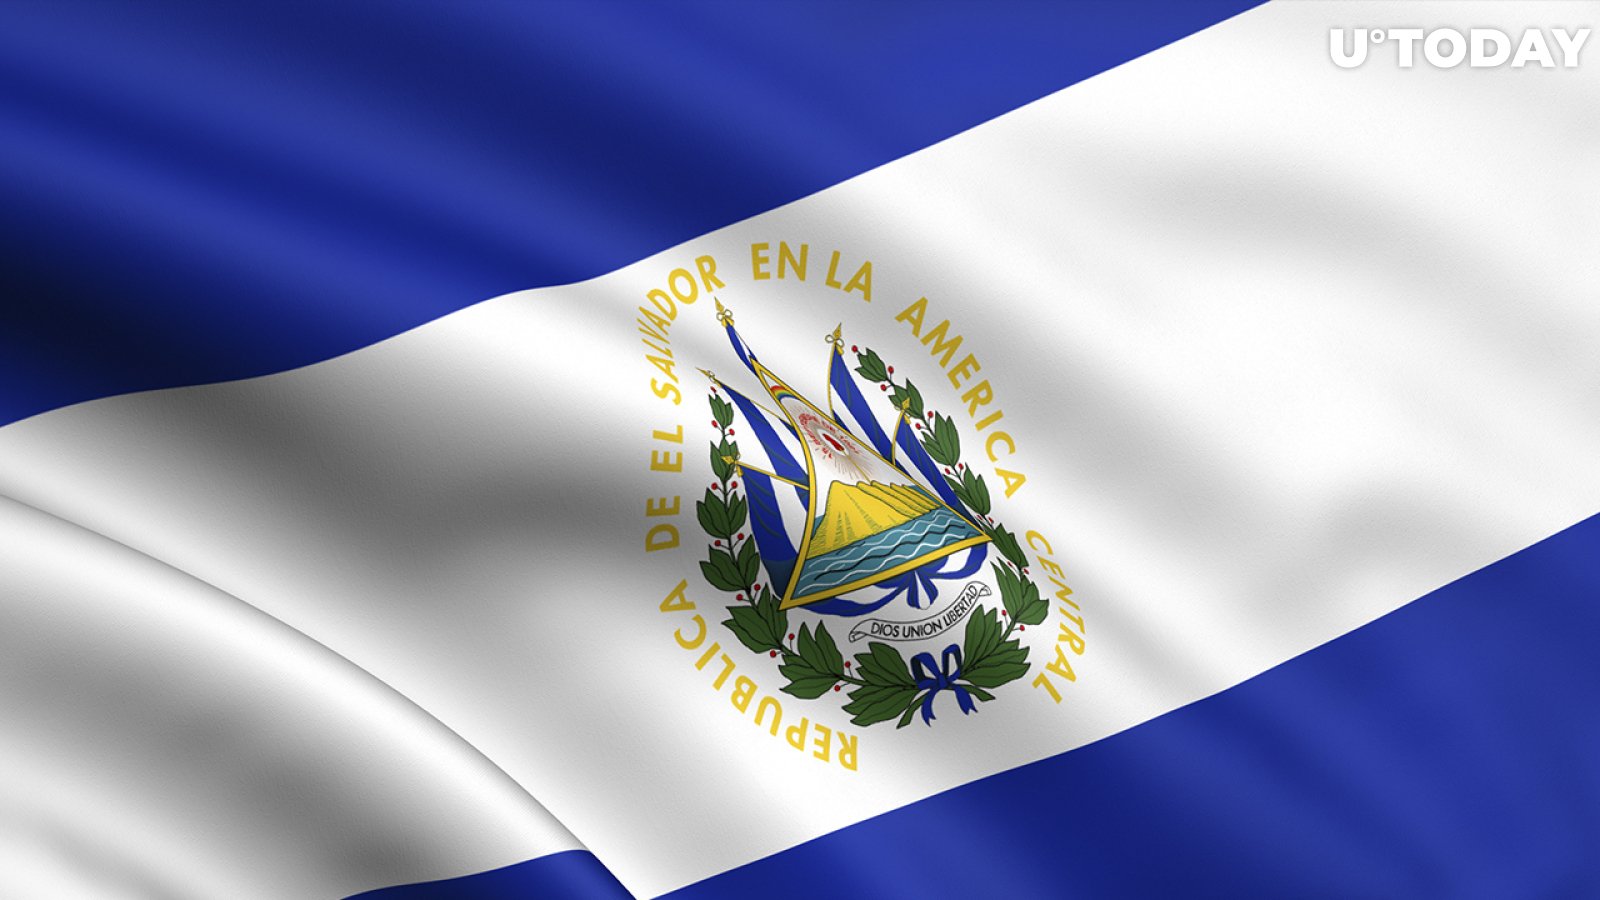 El Salvador Made $1 Million on BTC Trading in 11 Hour: Here's How